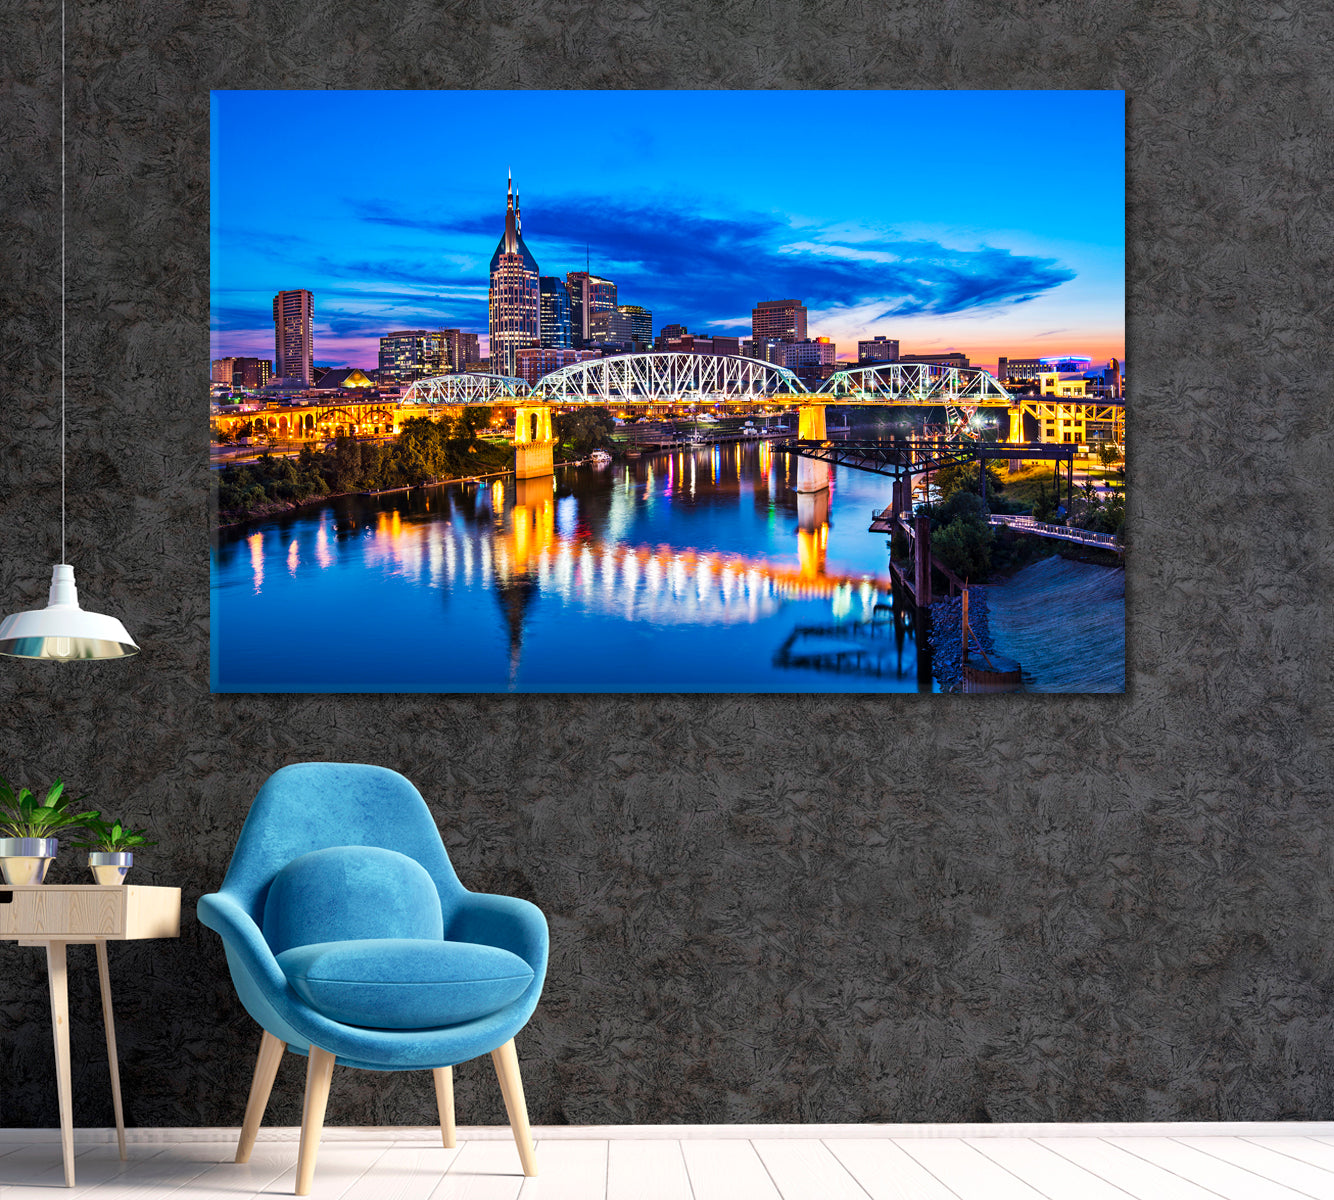 Downtown Nashville Tennessee Skyline Canvas Print ArtLexy 1 Panel 24"x16" inches 